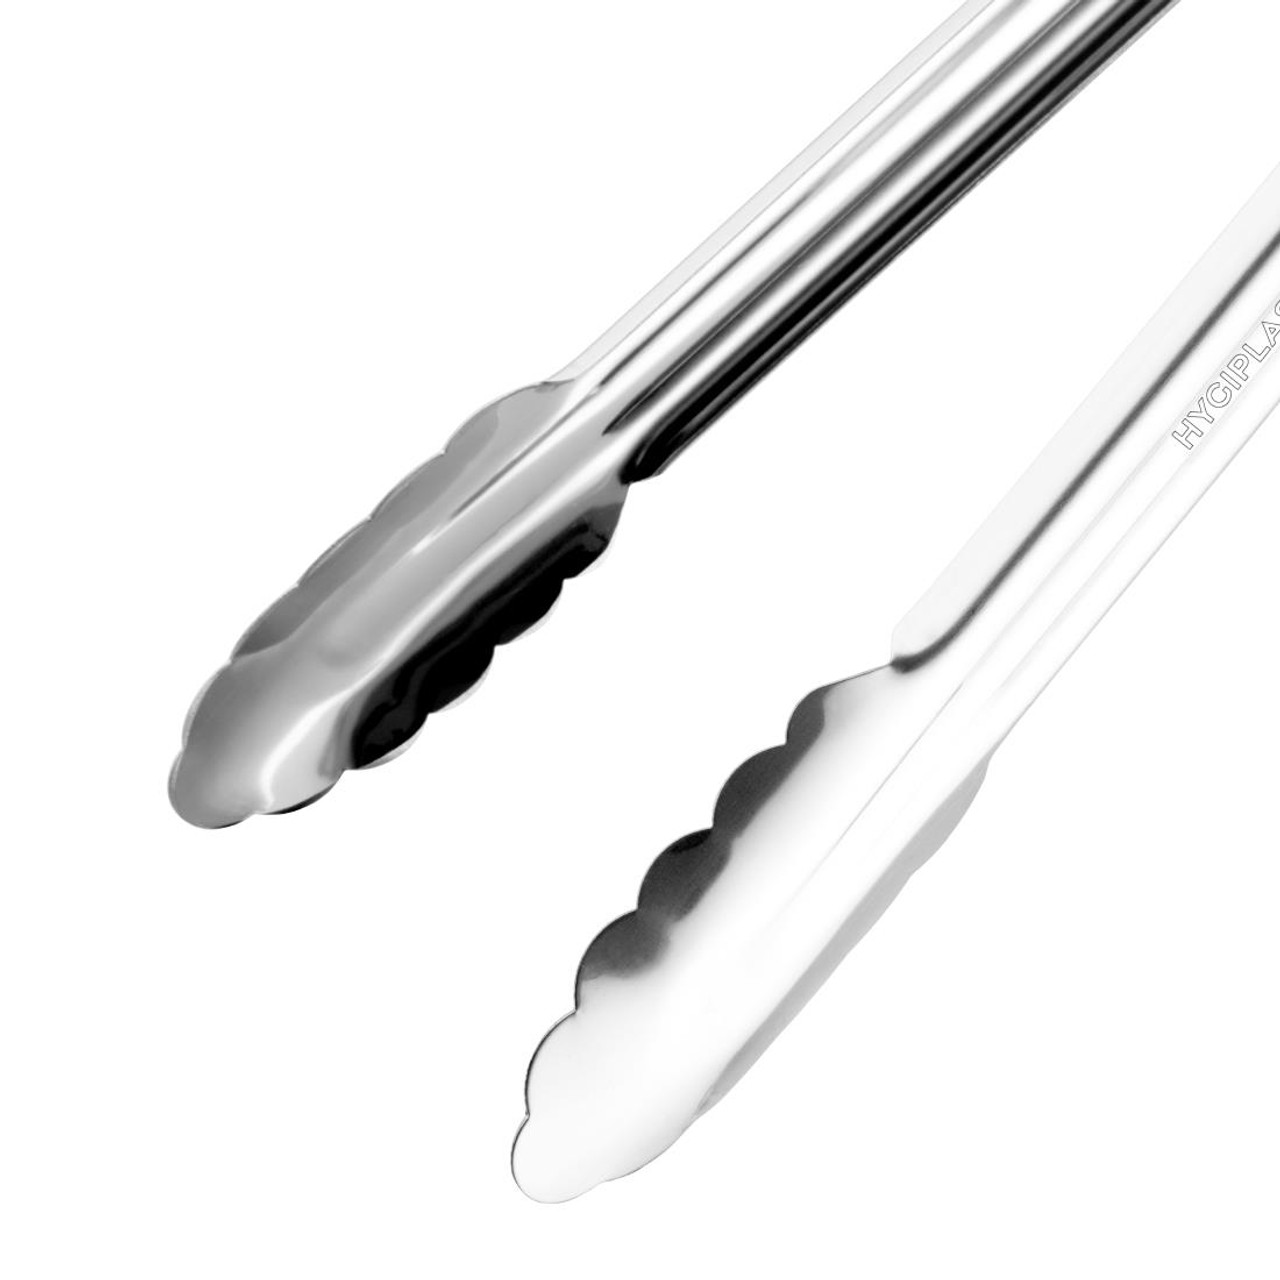 Hygiplas Colour Coded Red Serving Tongs 300mm - CB154 - Buy Online at  Nisbets